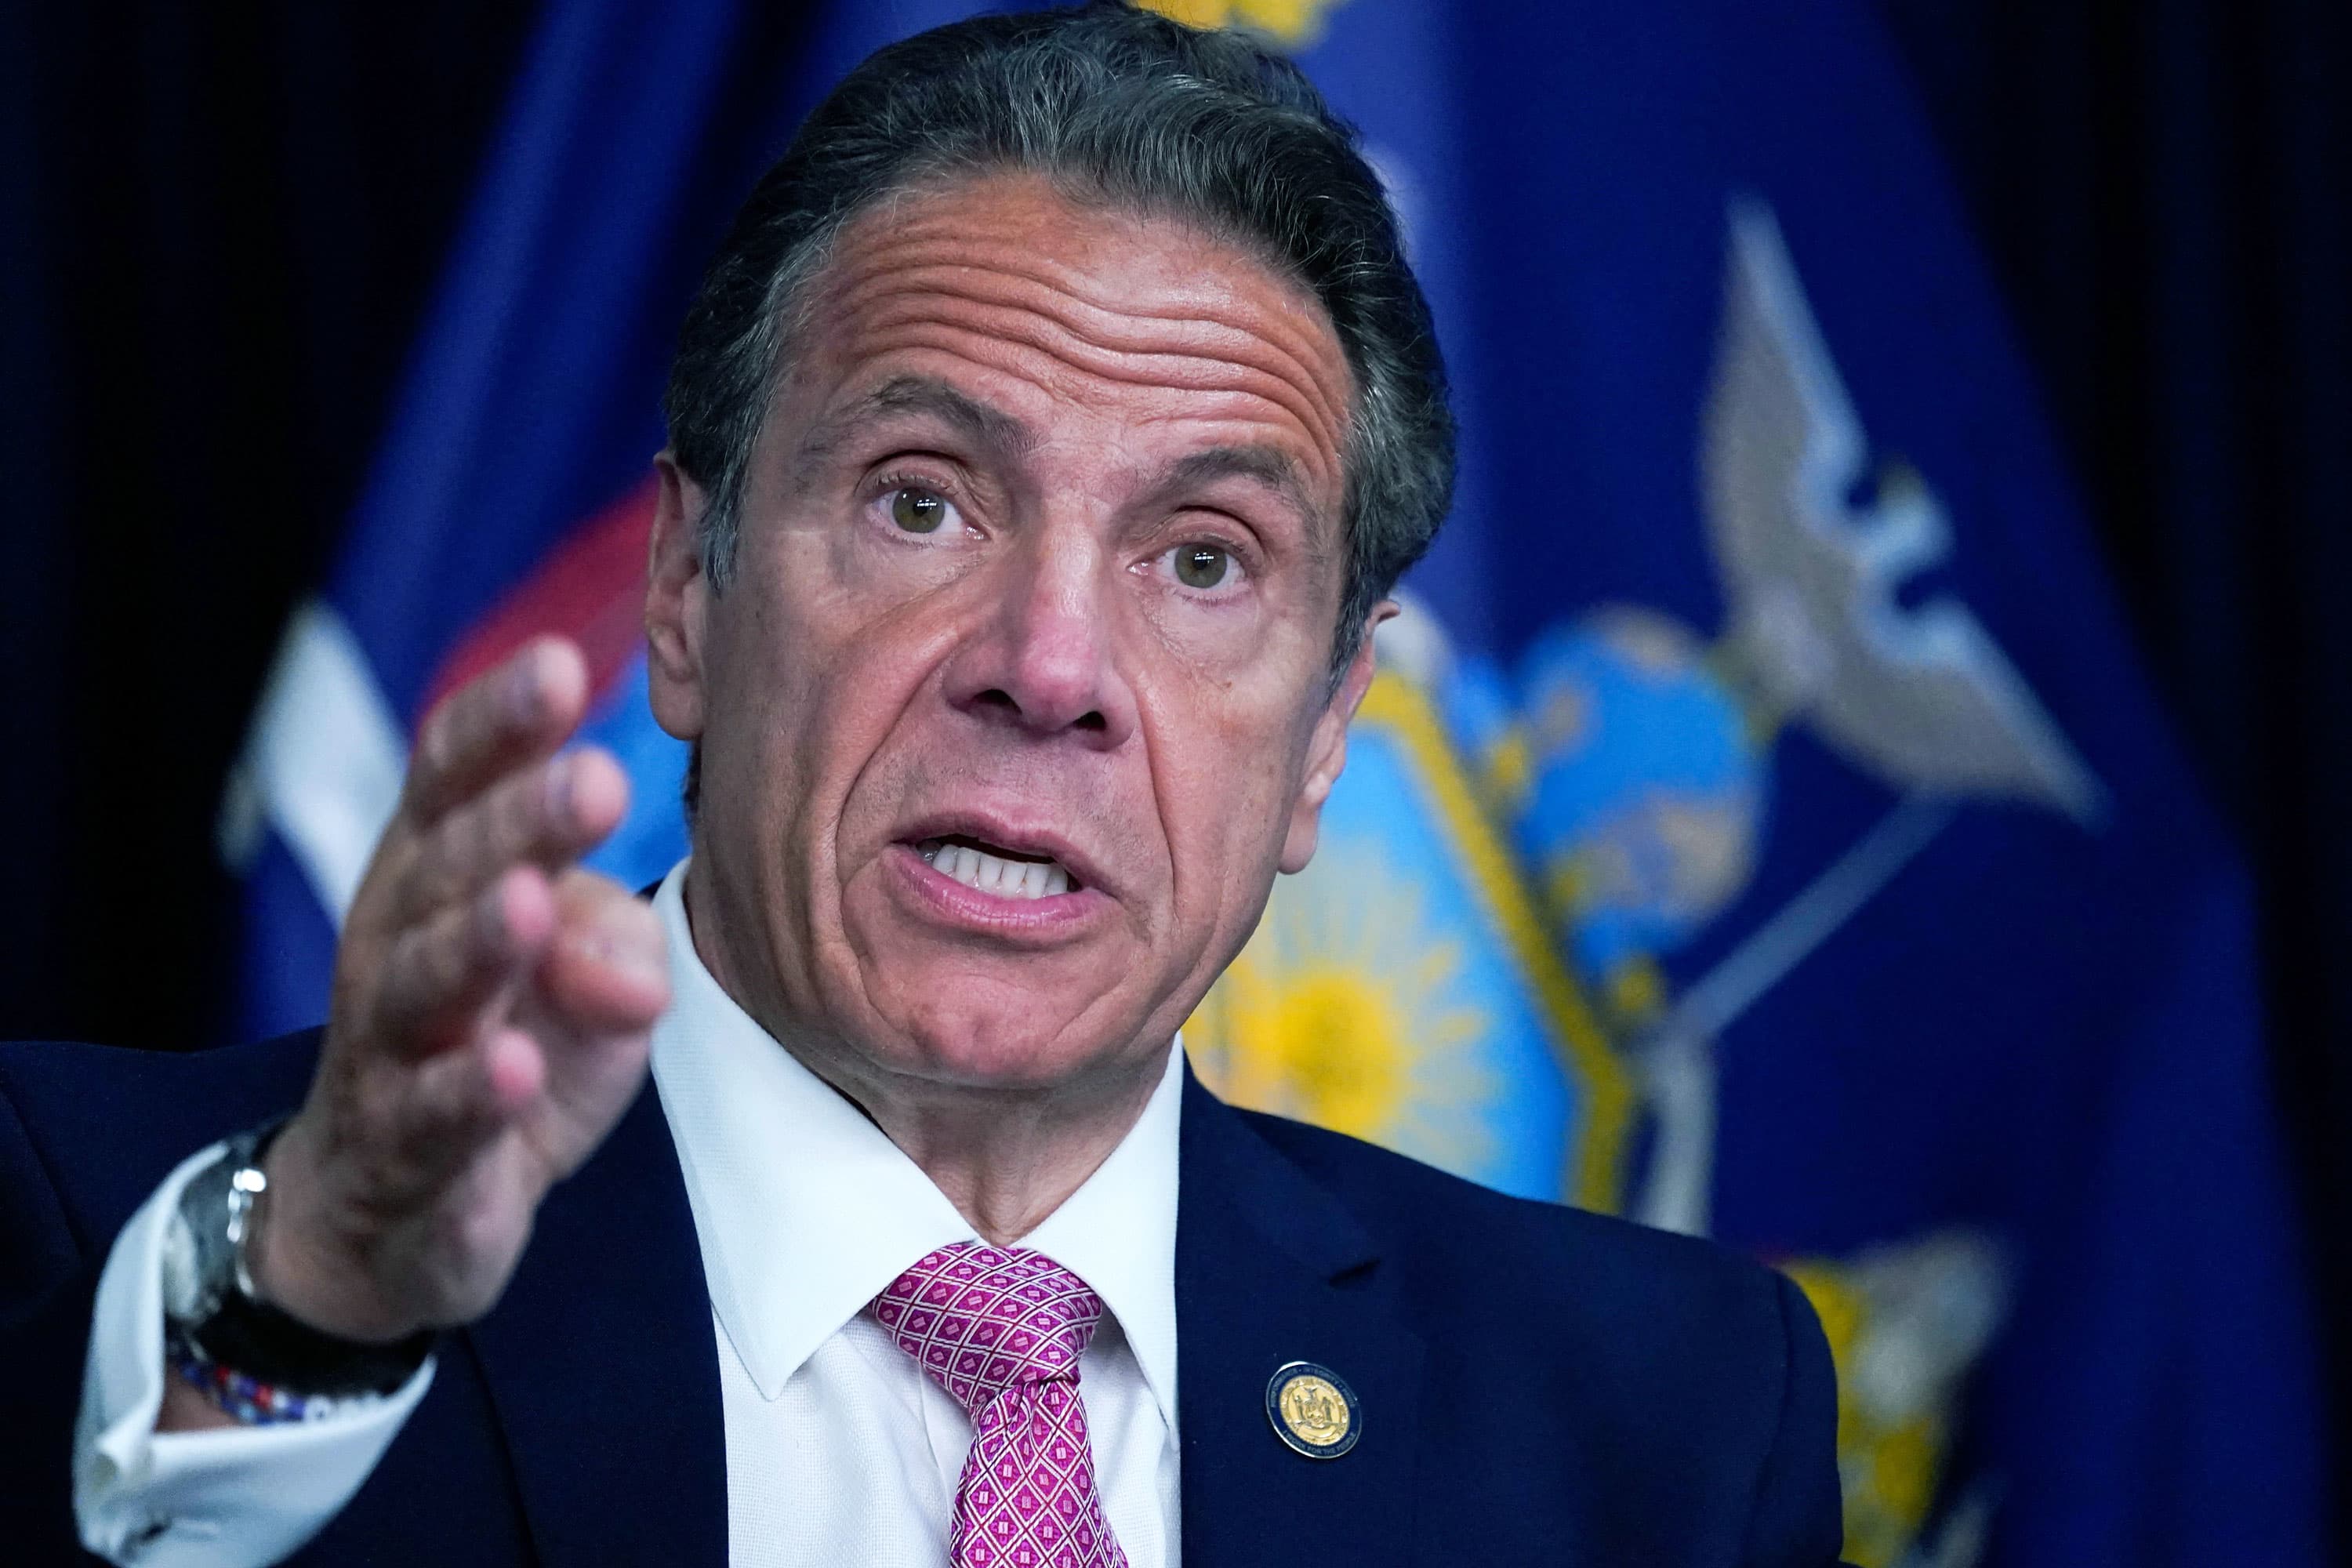 DOJ probing Andrew Cuomo sexual harassment claims, contract reveals